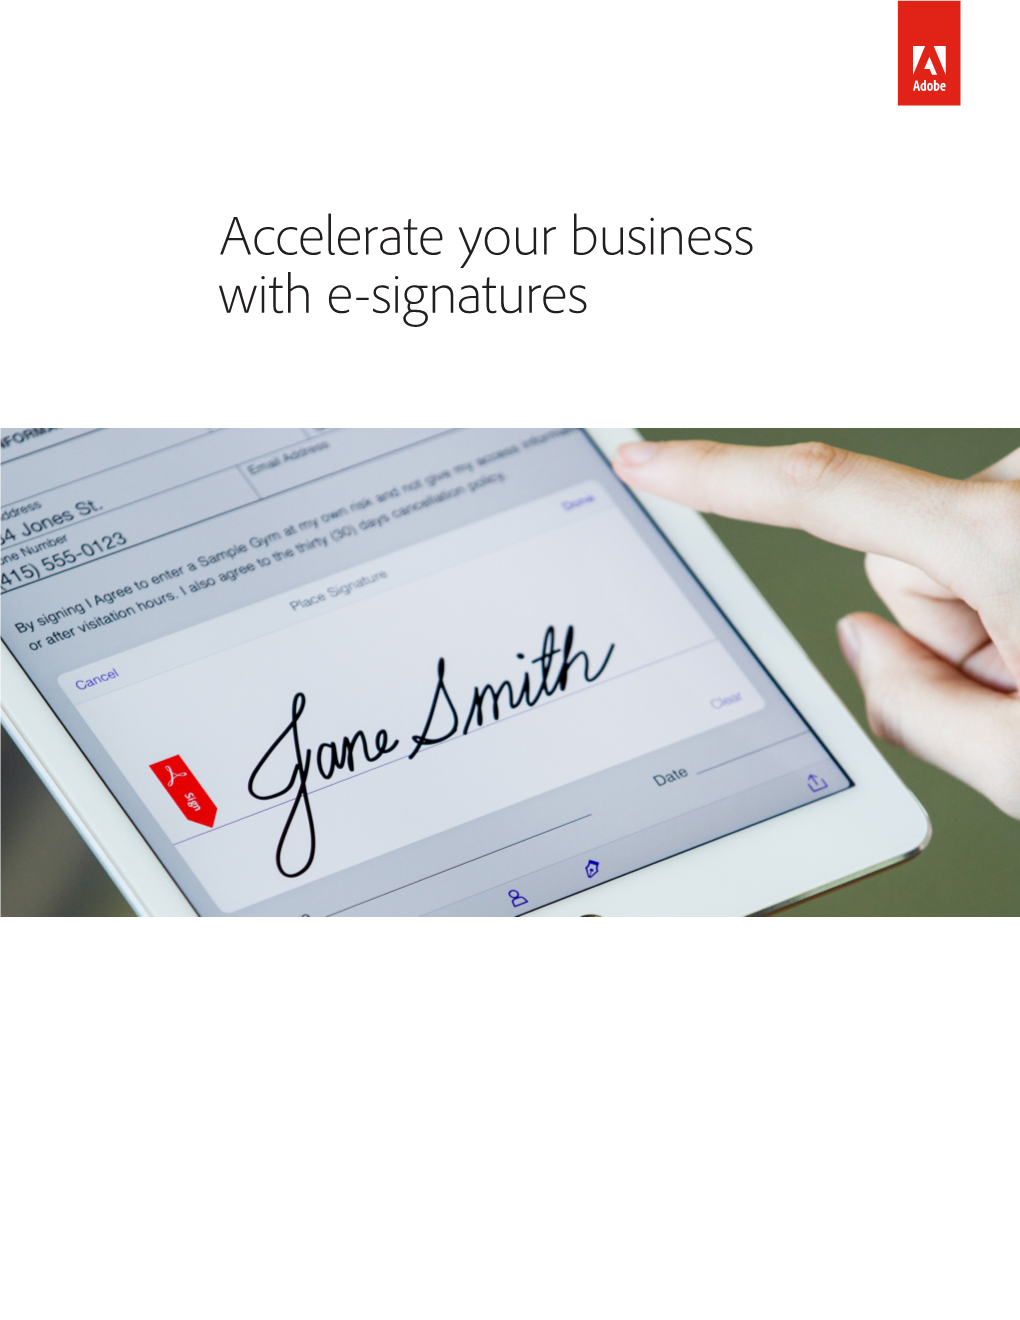 Accelerate Your Business with E-Signatures Small and Medium Businesses Are Using E-Signature Solutions to Increase Their Competitive Advantage